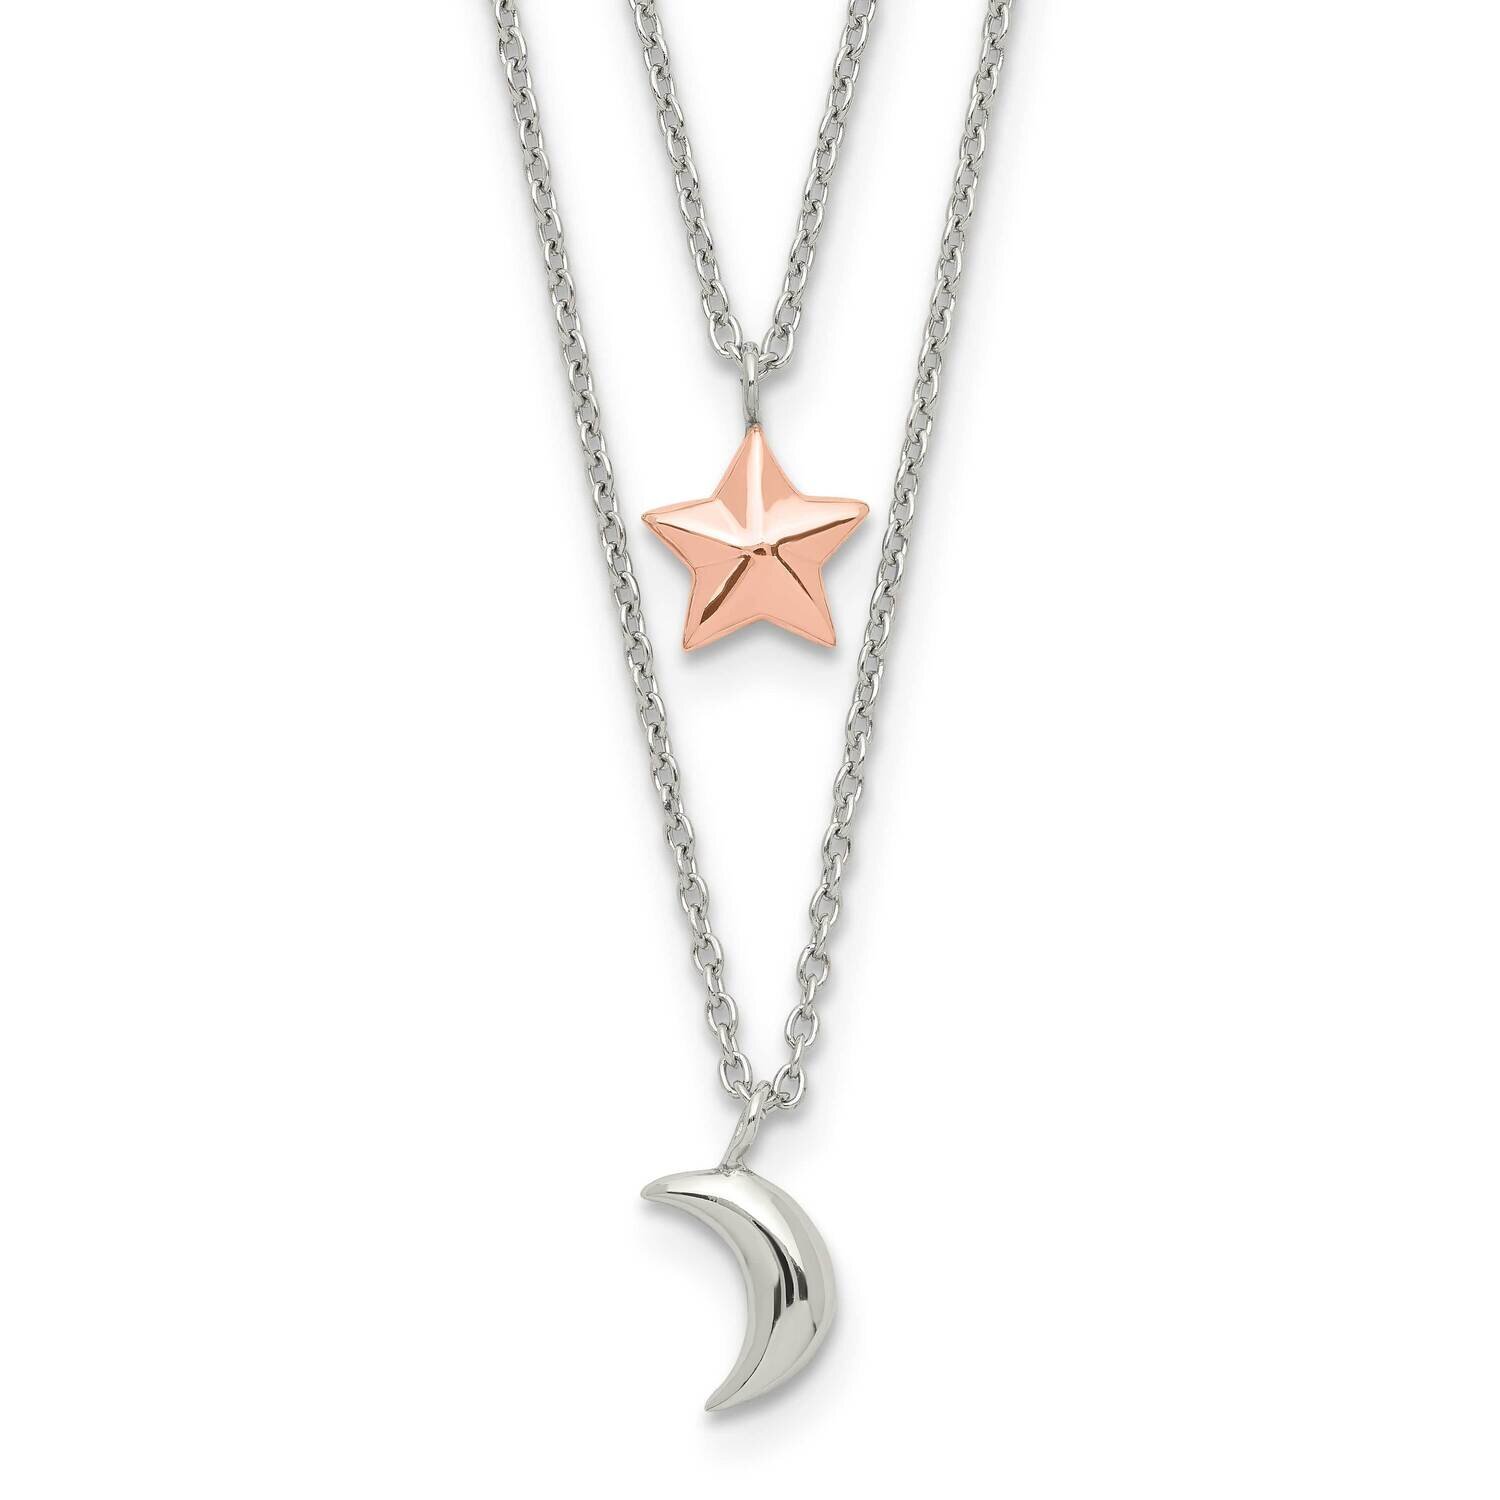 2-Strand Moon and Star with 1 Inch Extender Necklace Sterling Silver Rose-tone QG5488-17.5